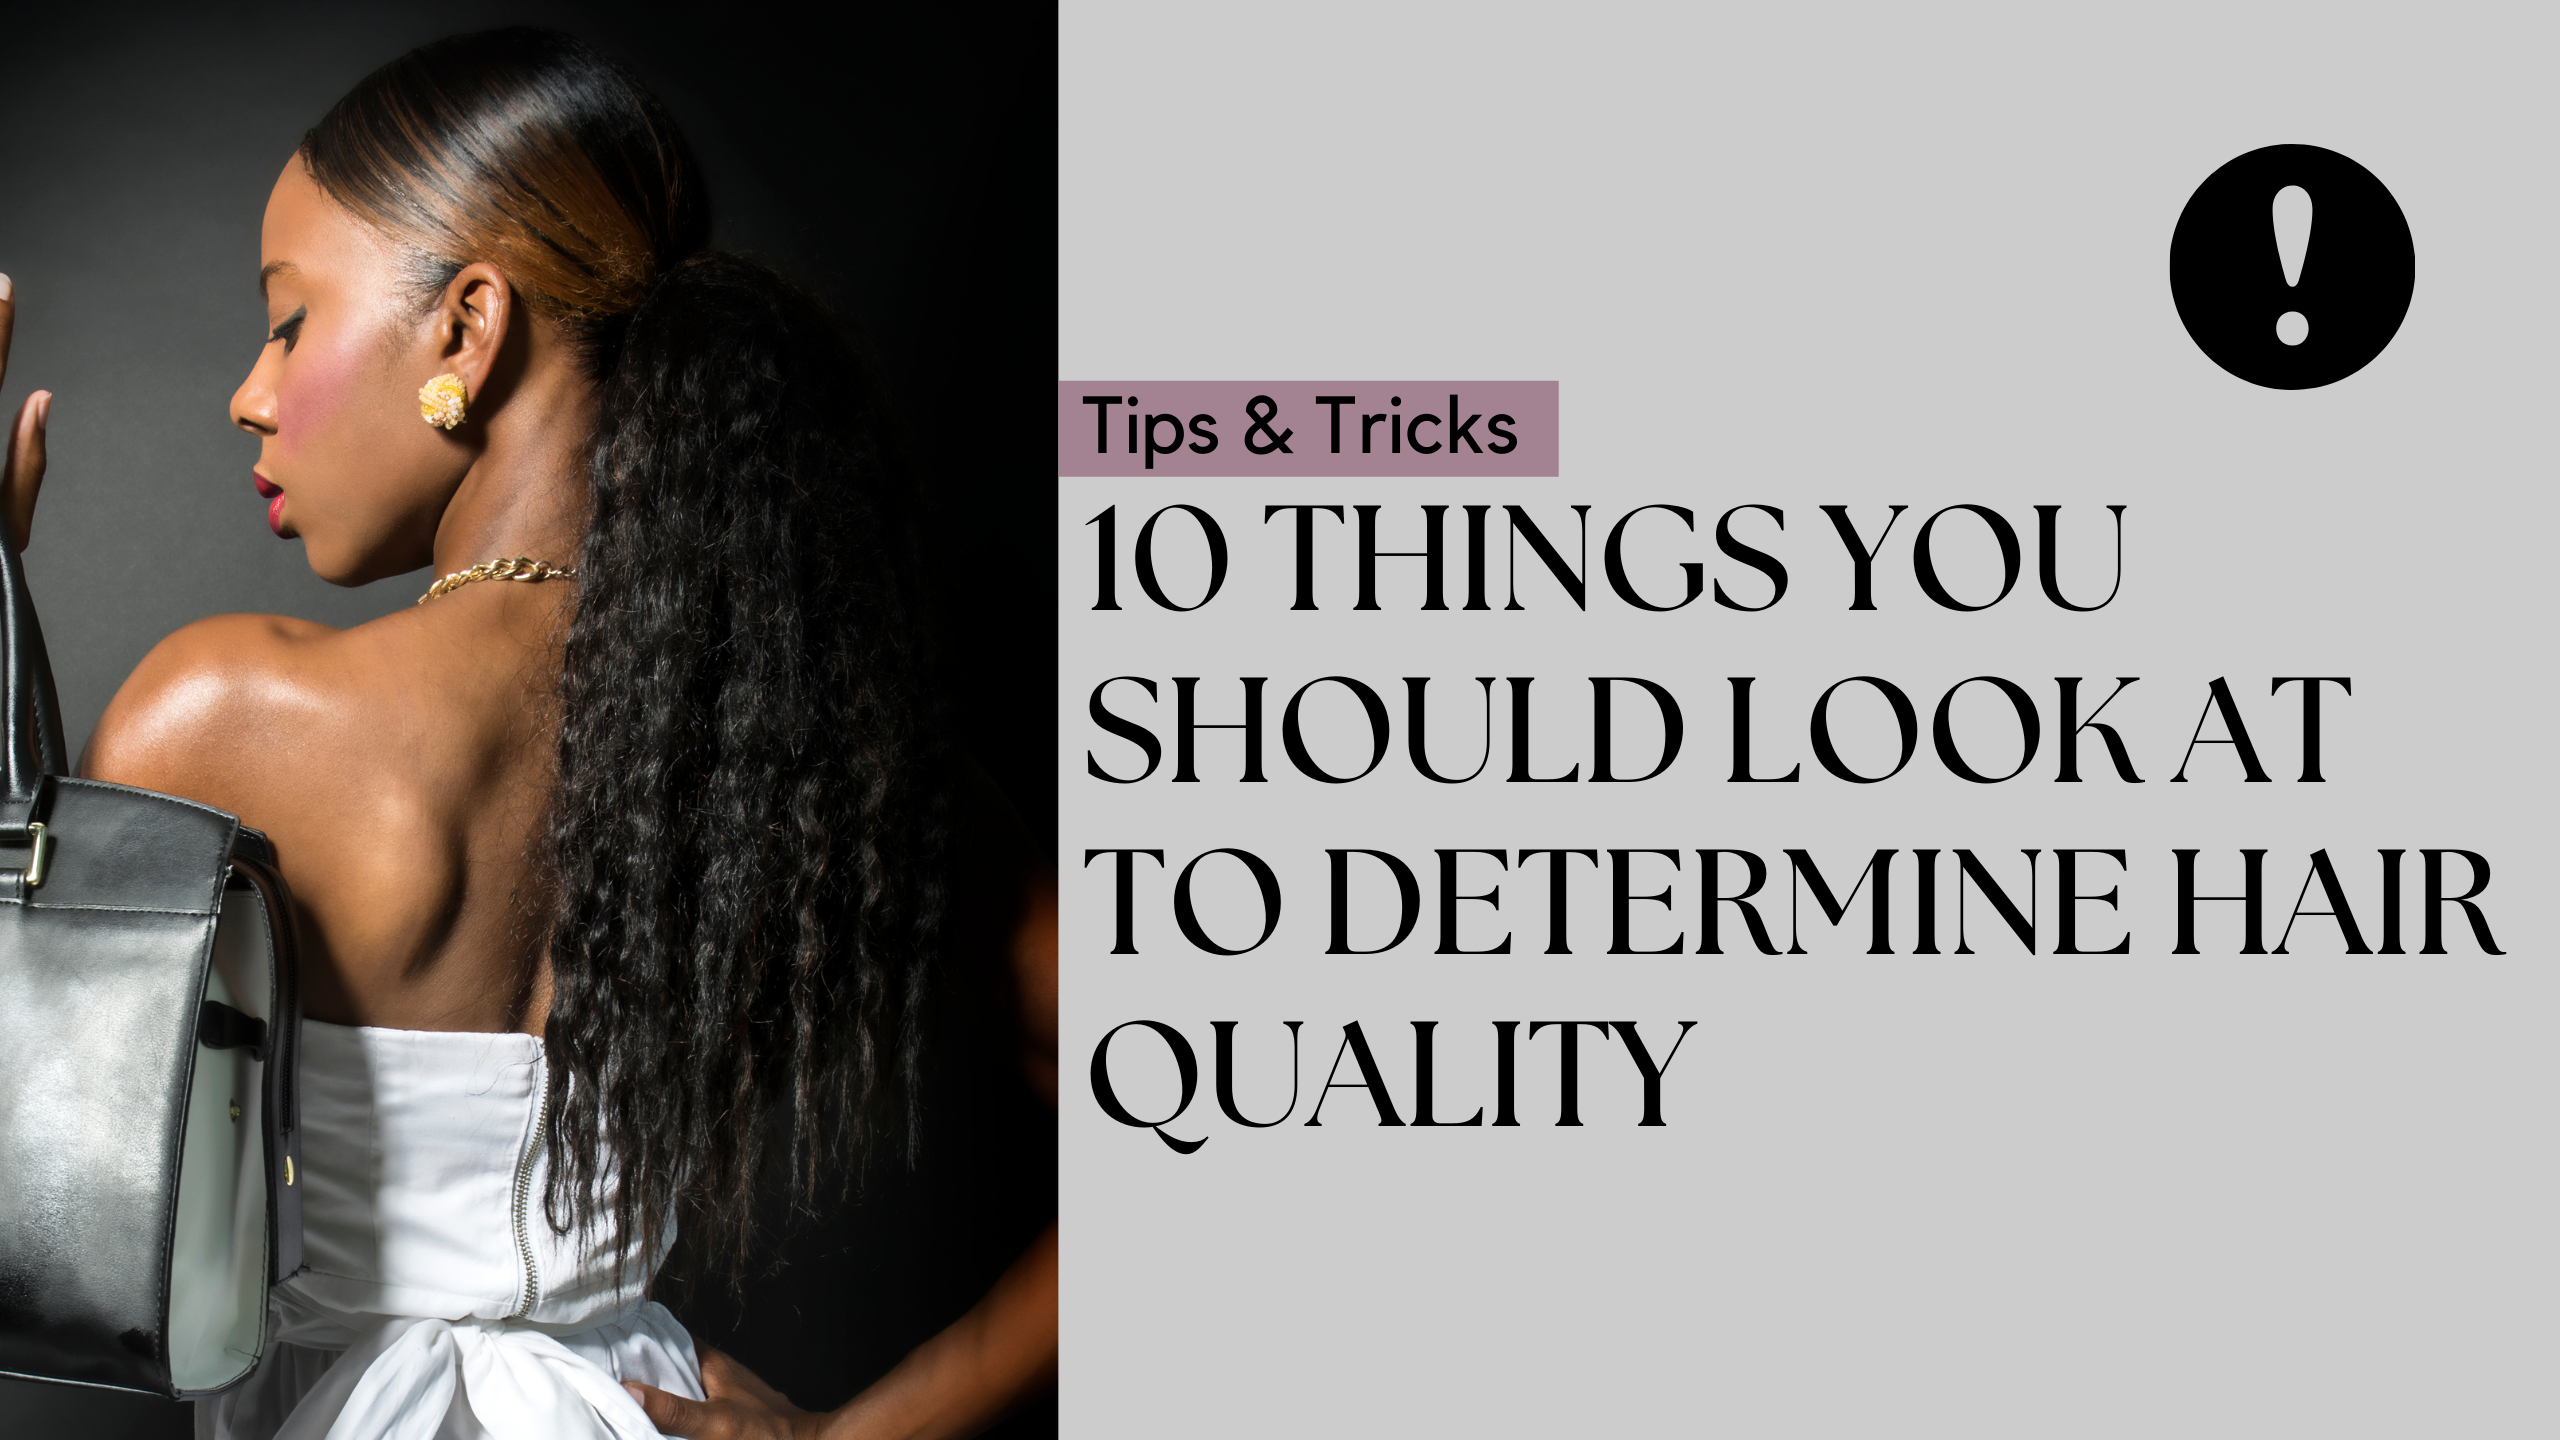 How to test hair quality